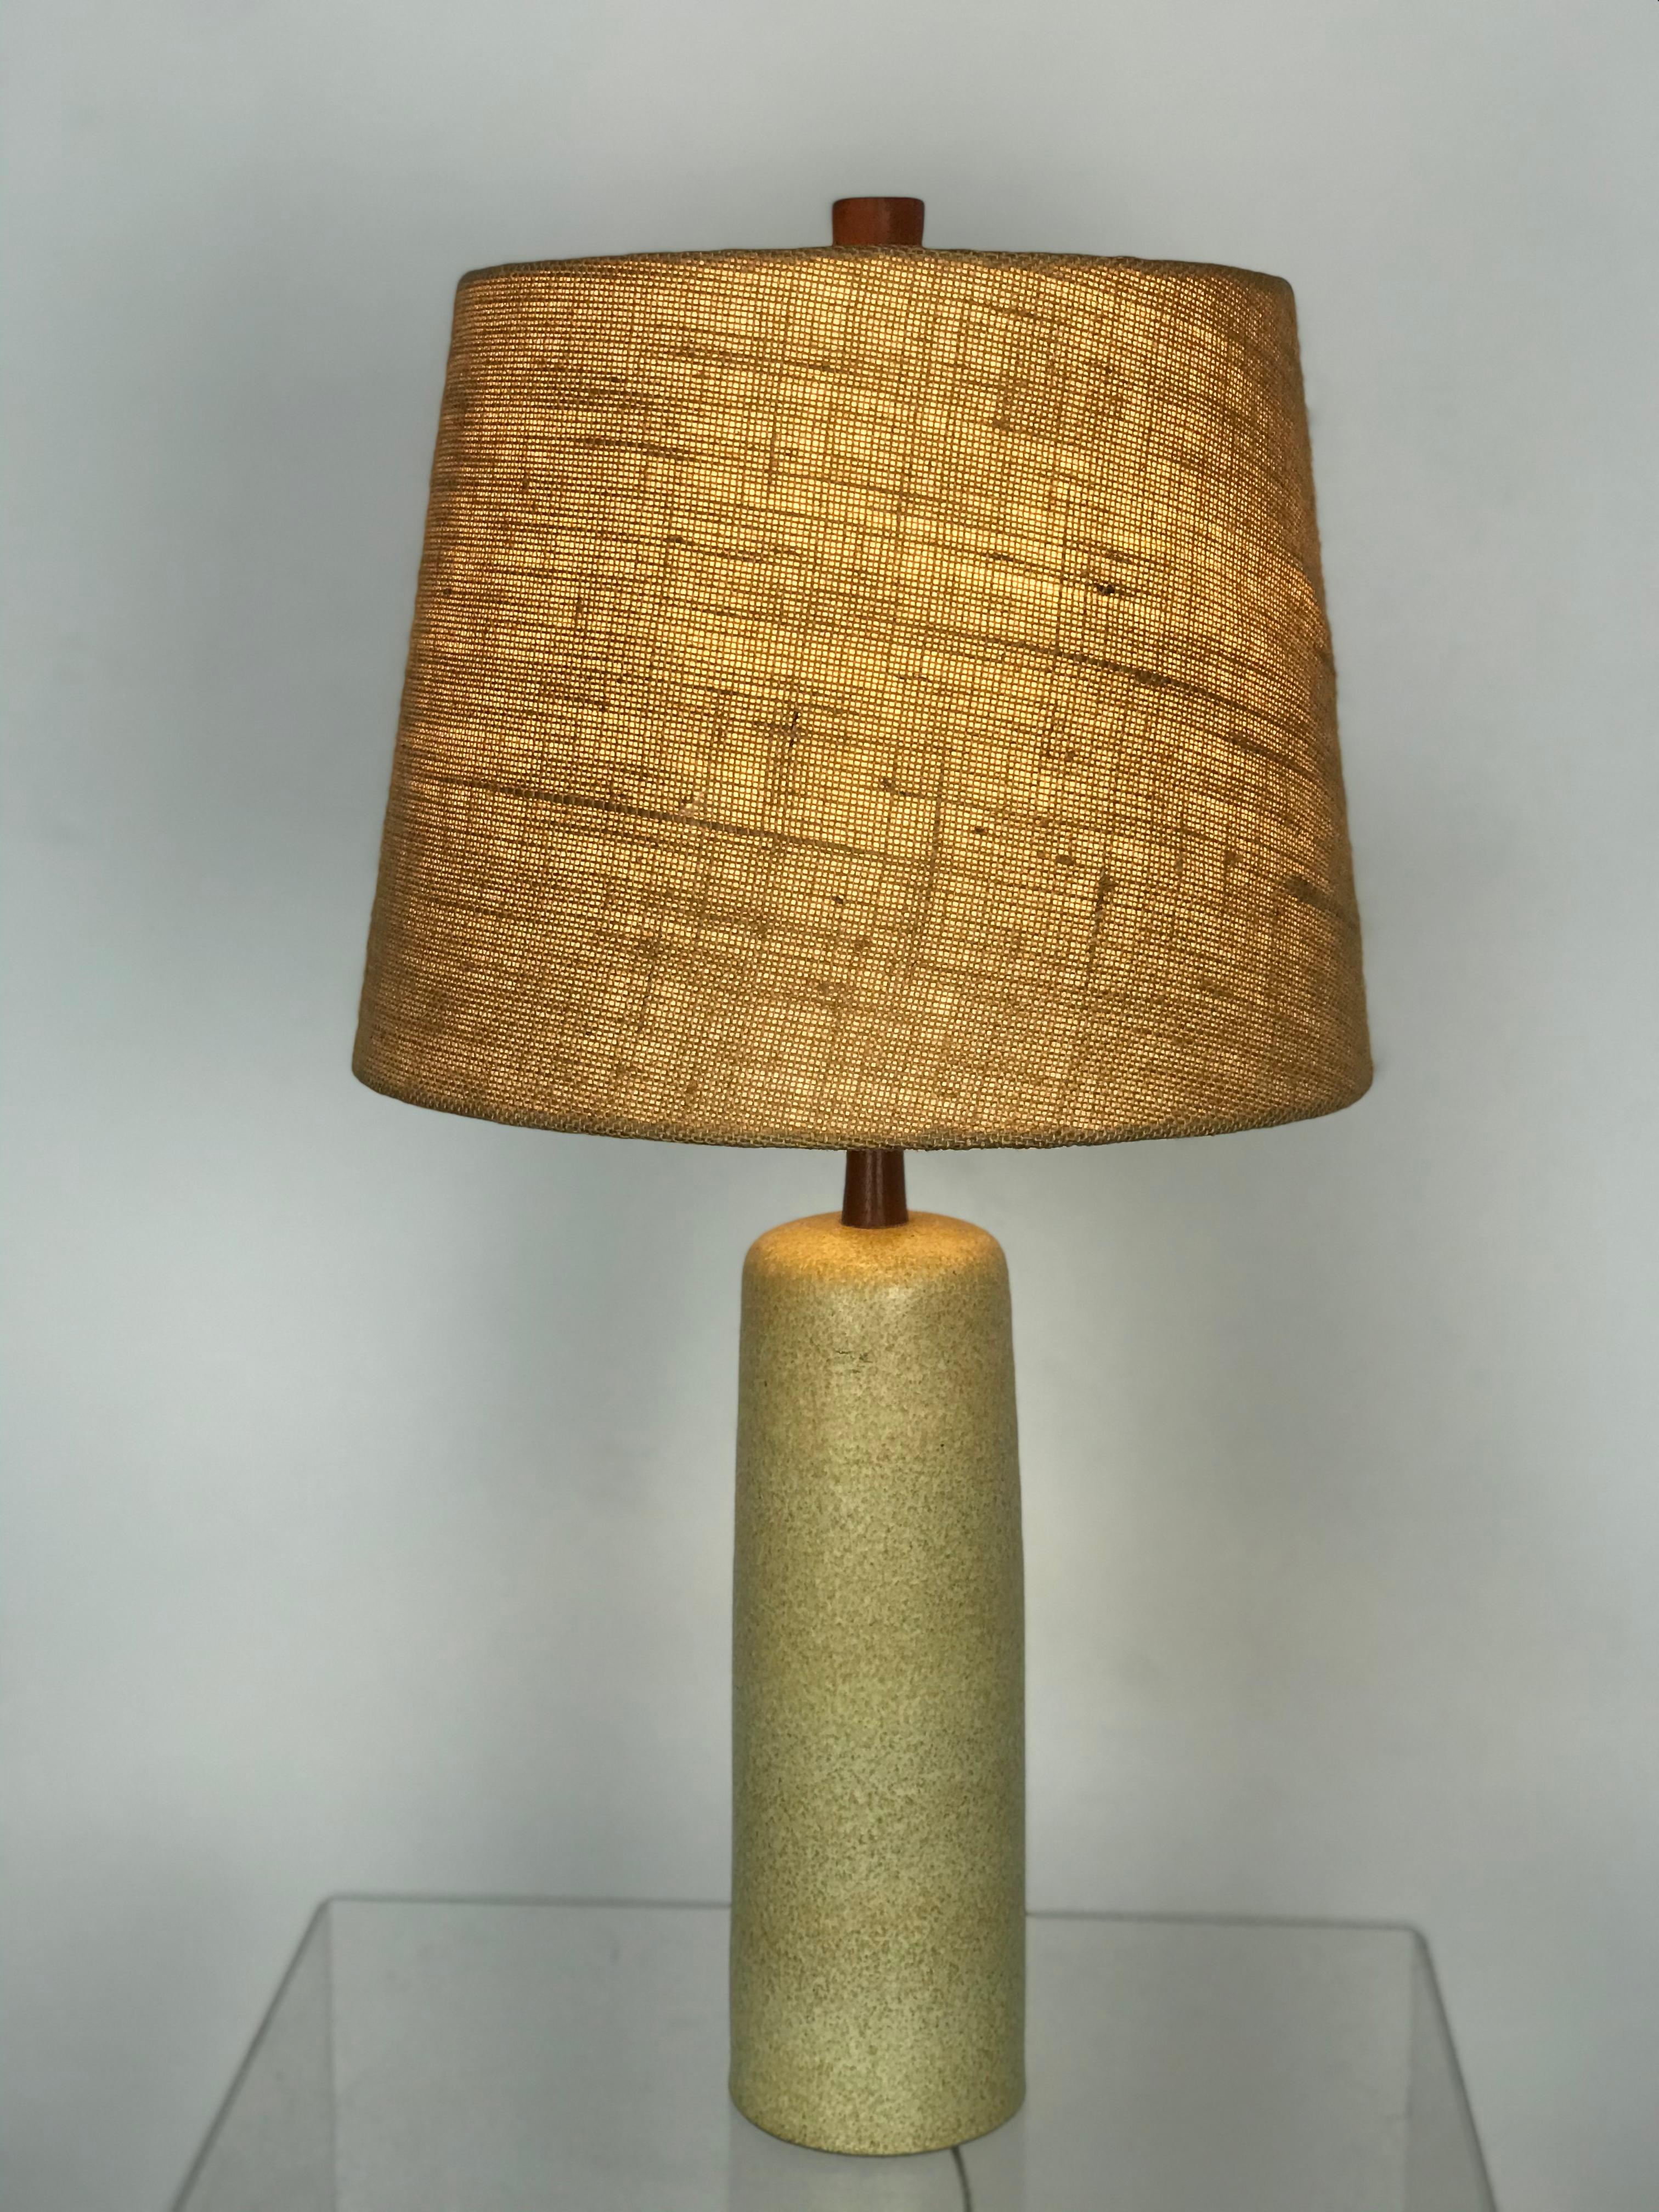 Very nice ceramic lamp by Jane & Gordon Martz for Marshall Studios, 1960s. Original wiring. Beautiful walnut stalk and finial. Small hardly noticeable abrasion to the top of base, see pictures.

Measures: 29.5